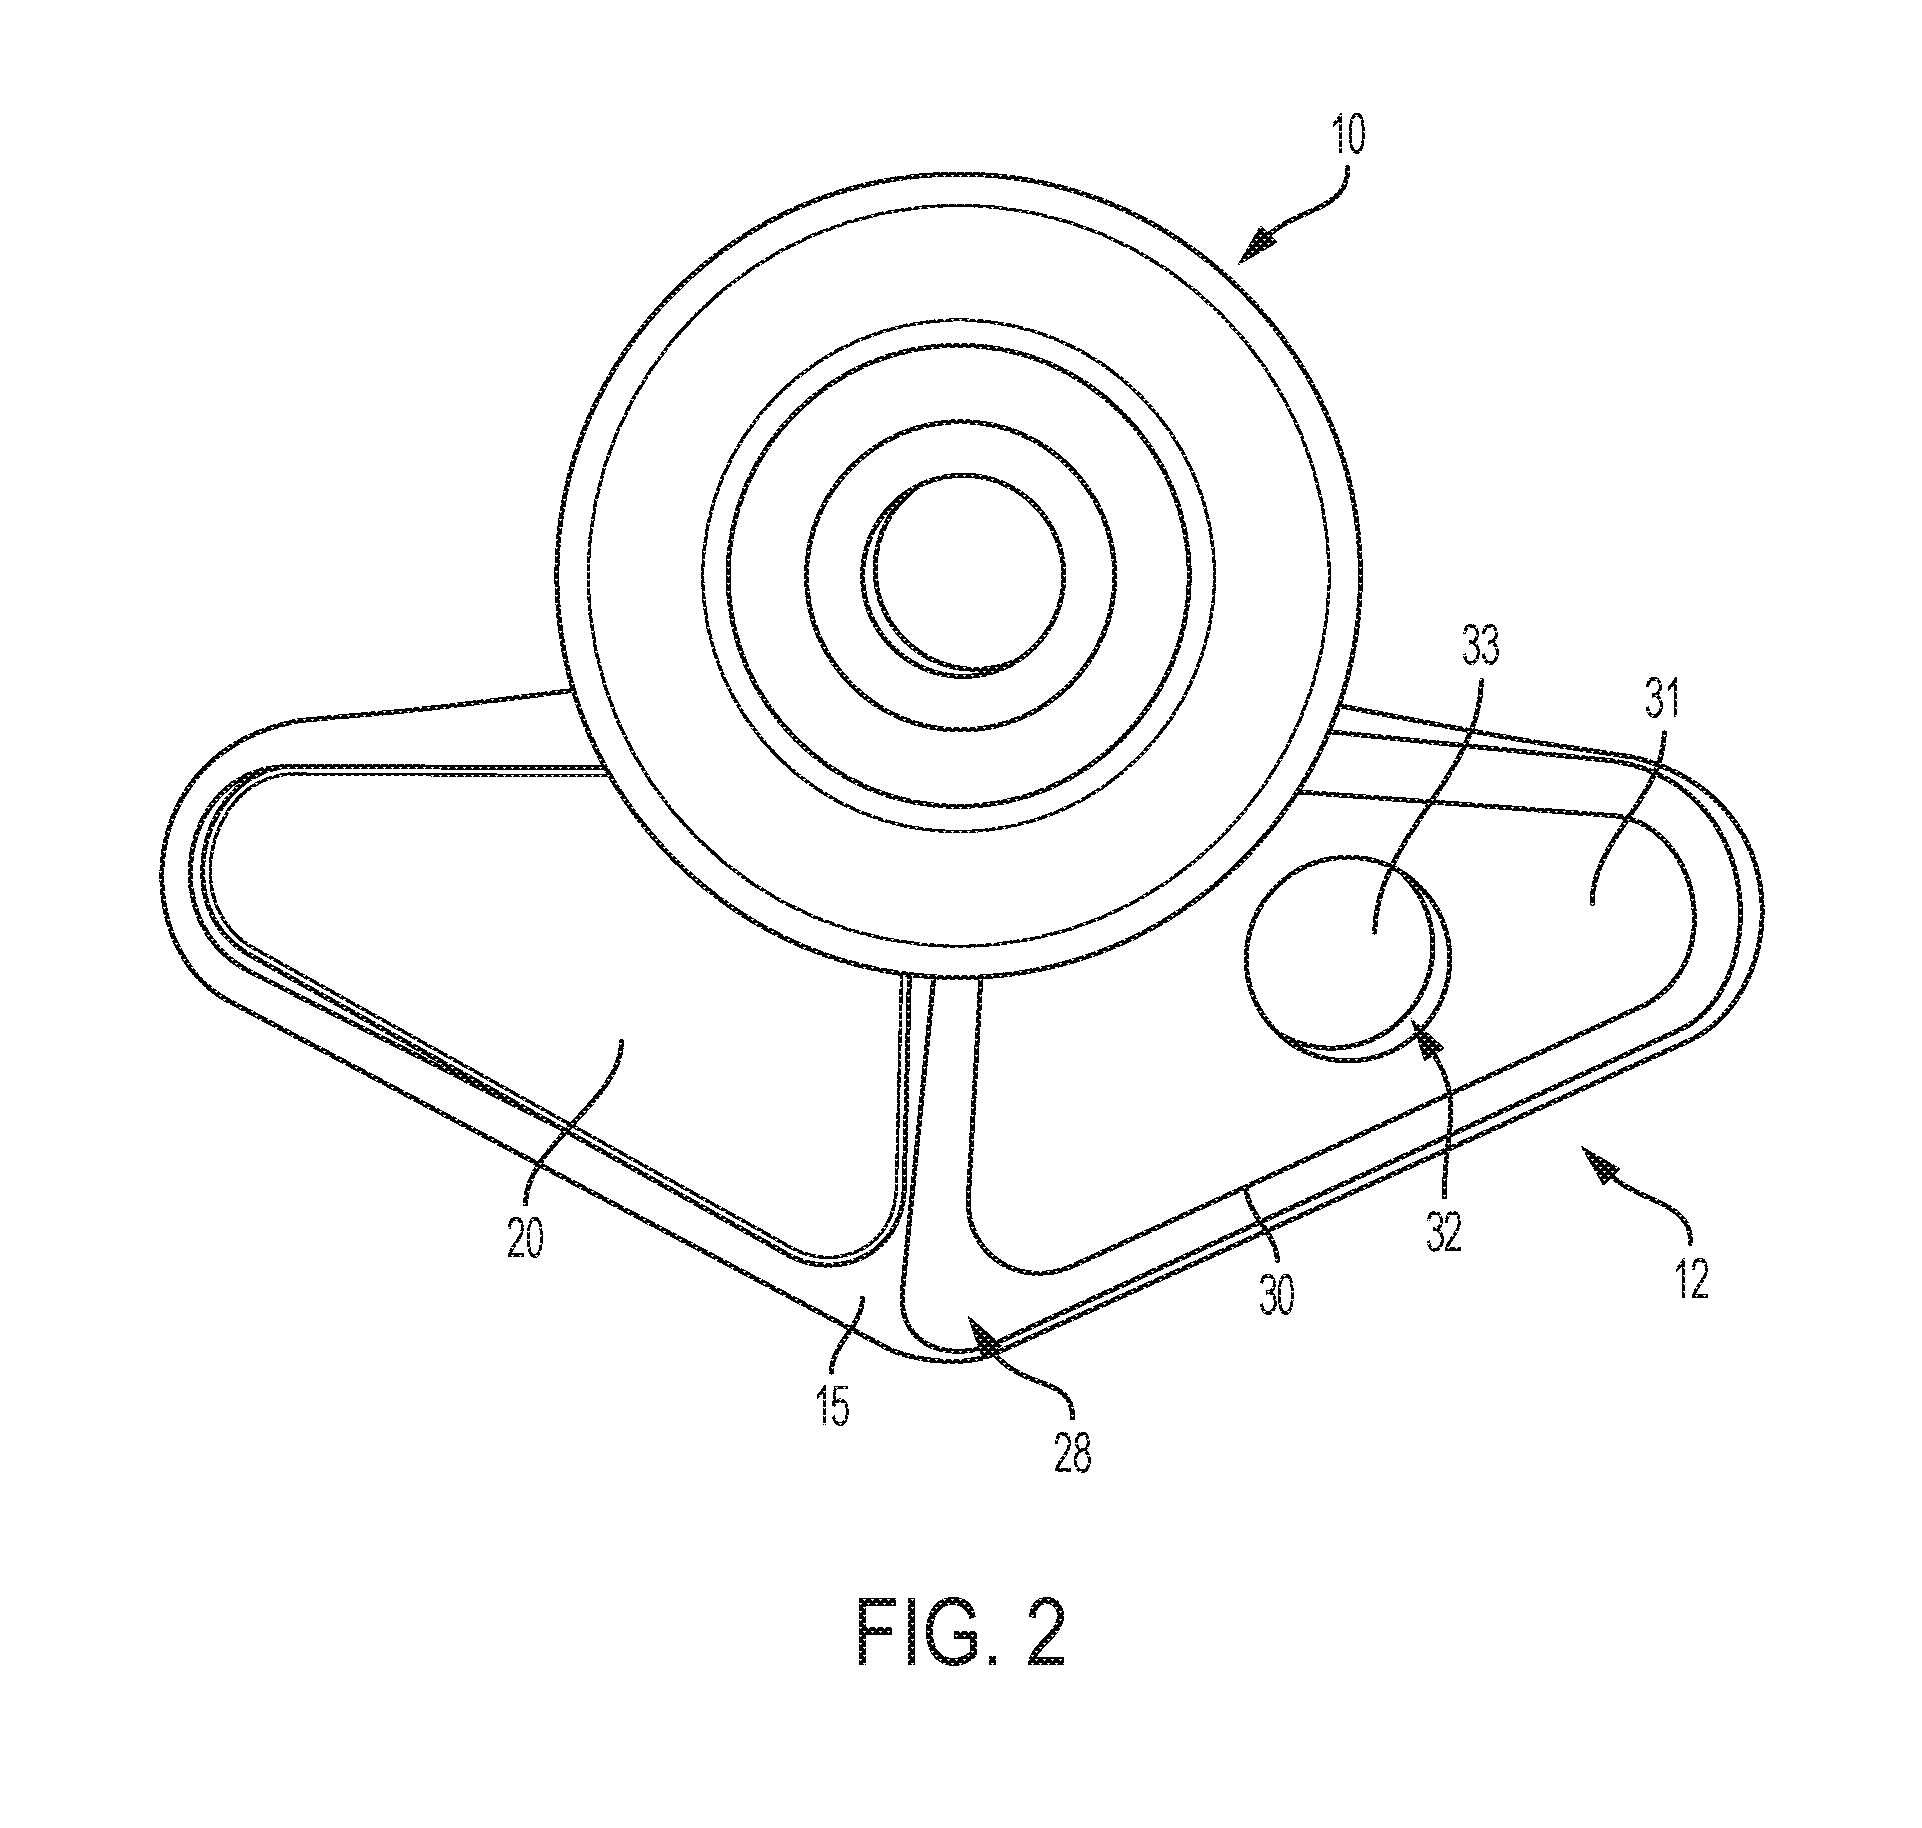 Cleaning Device for Cleaning a Scope, Laparoscope or Microscope Used in Surgery or Other Medical Procedures and a Method of Using the Device During Surgical or Other Medical Procedures